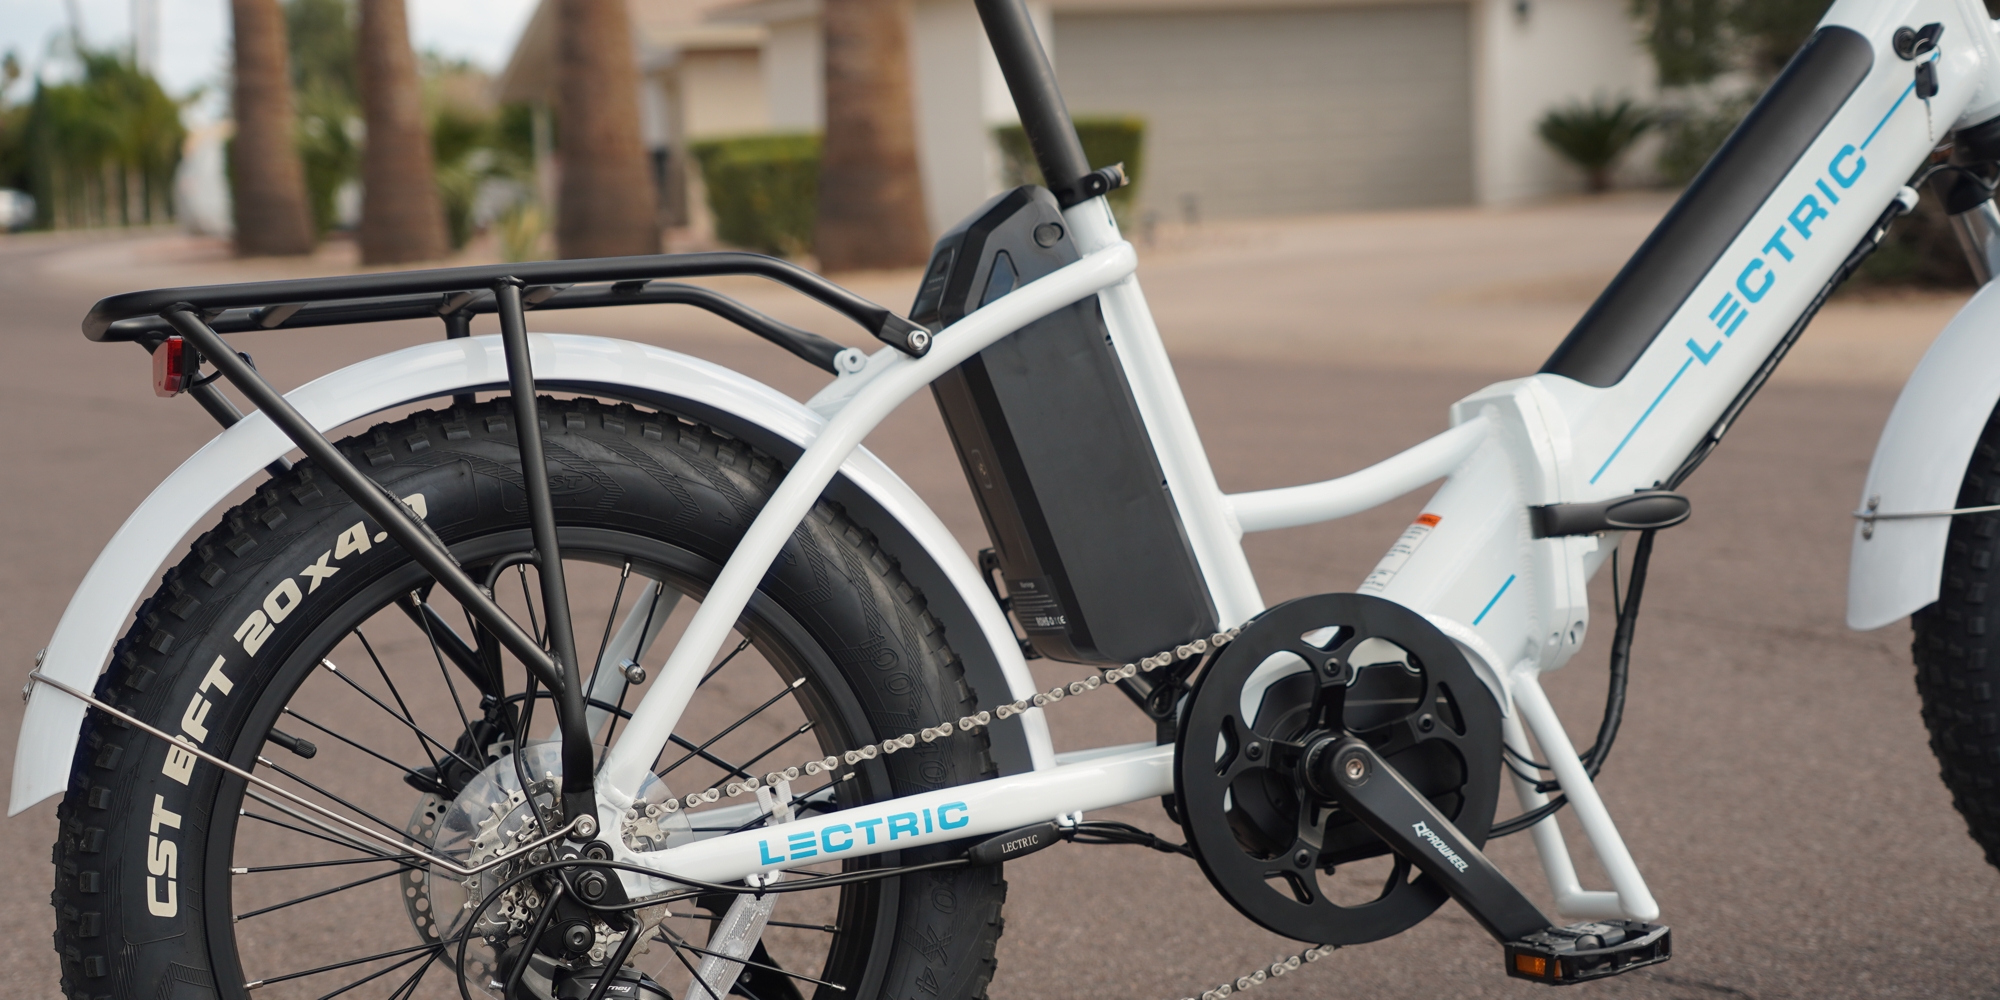 Lectric XPremium e-bike launched with mid-drive motor and dual